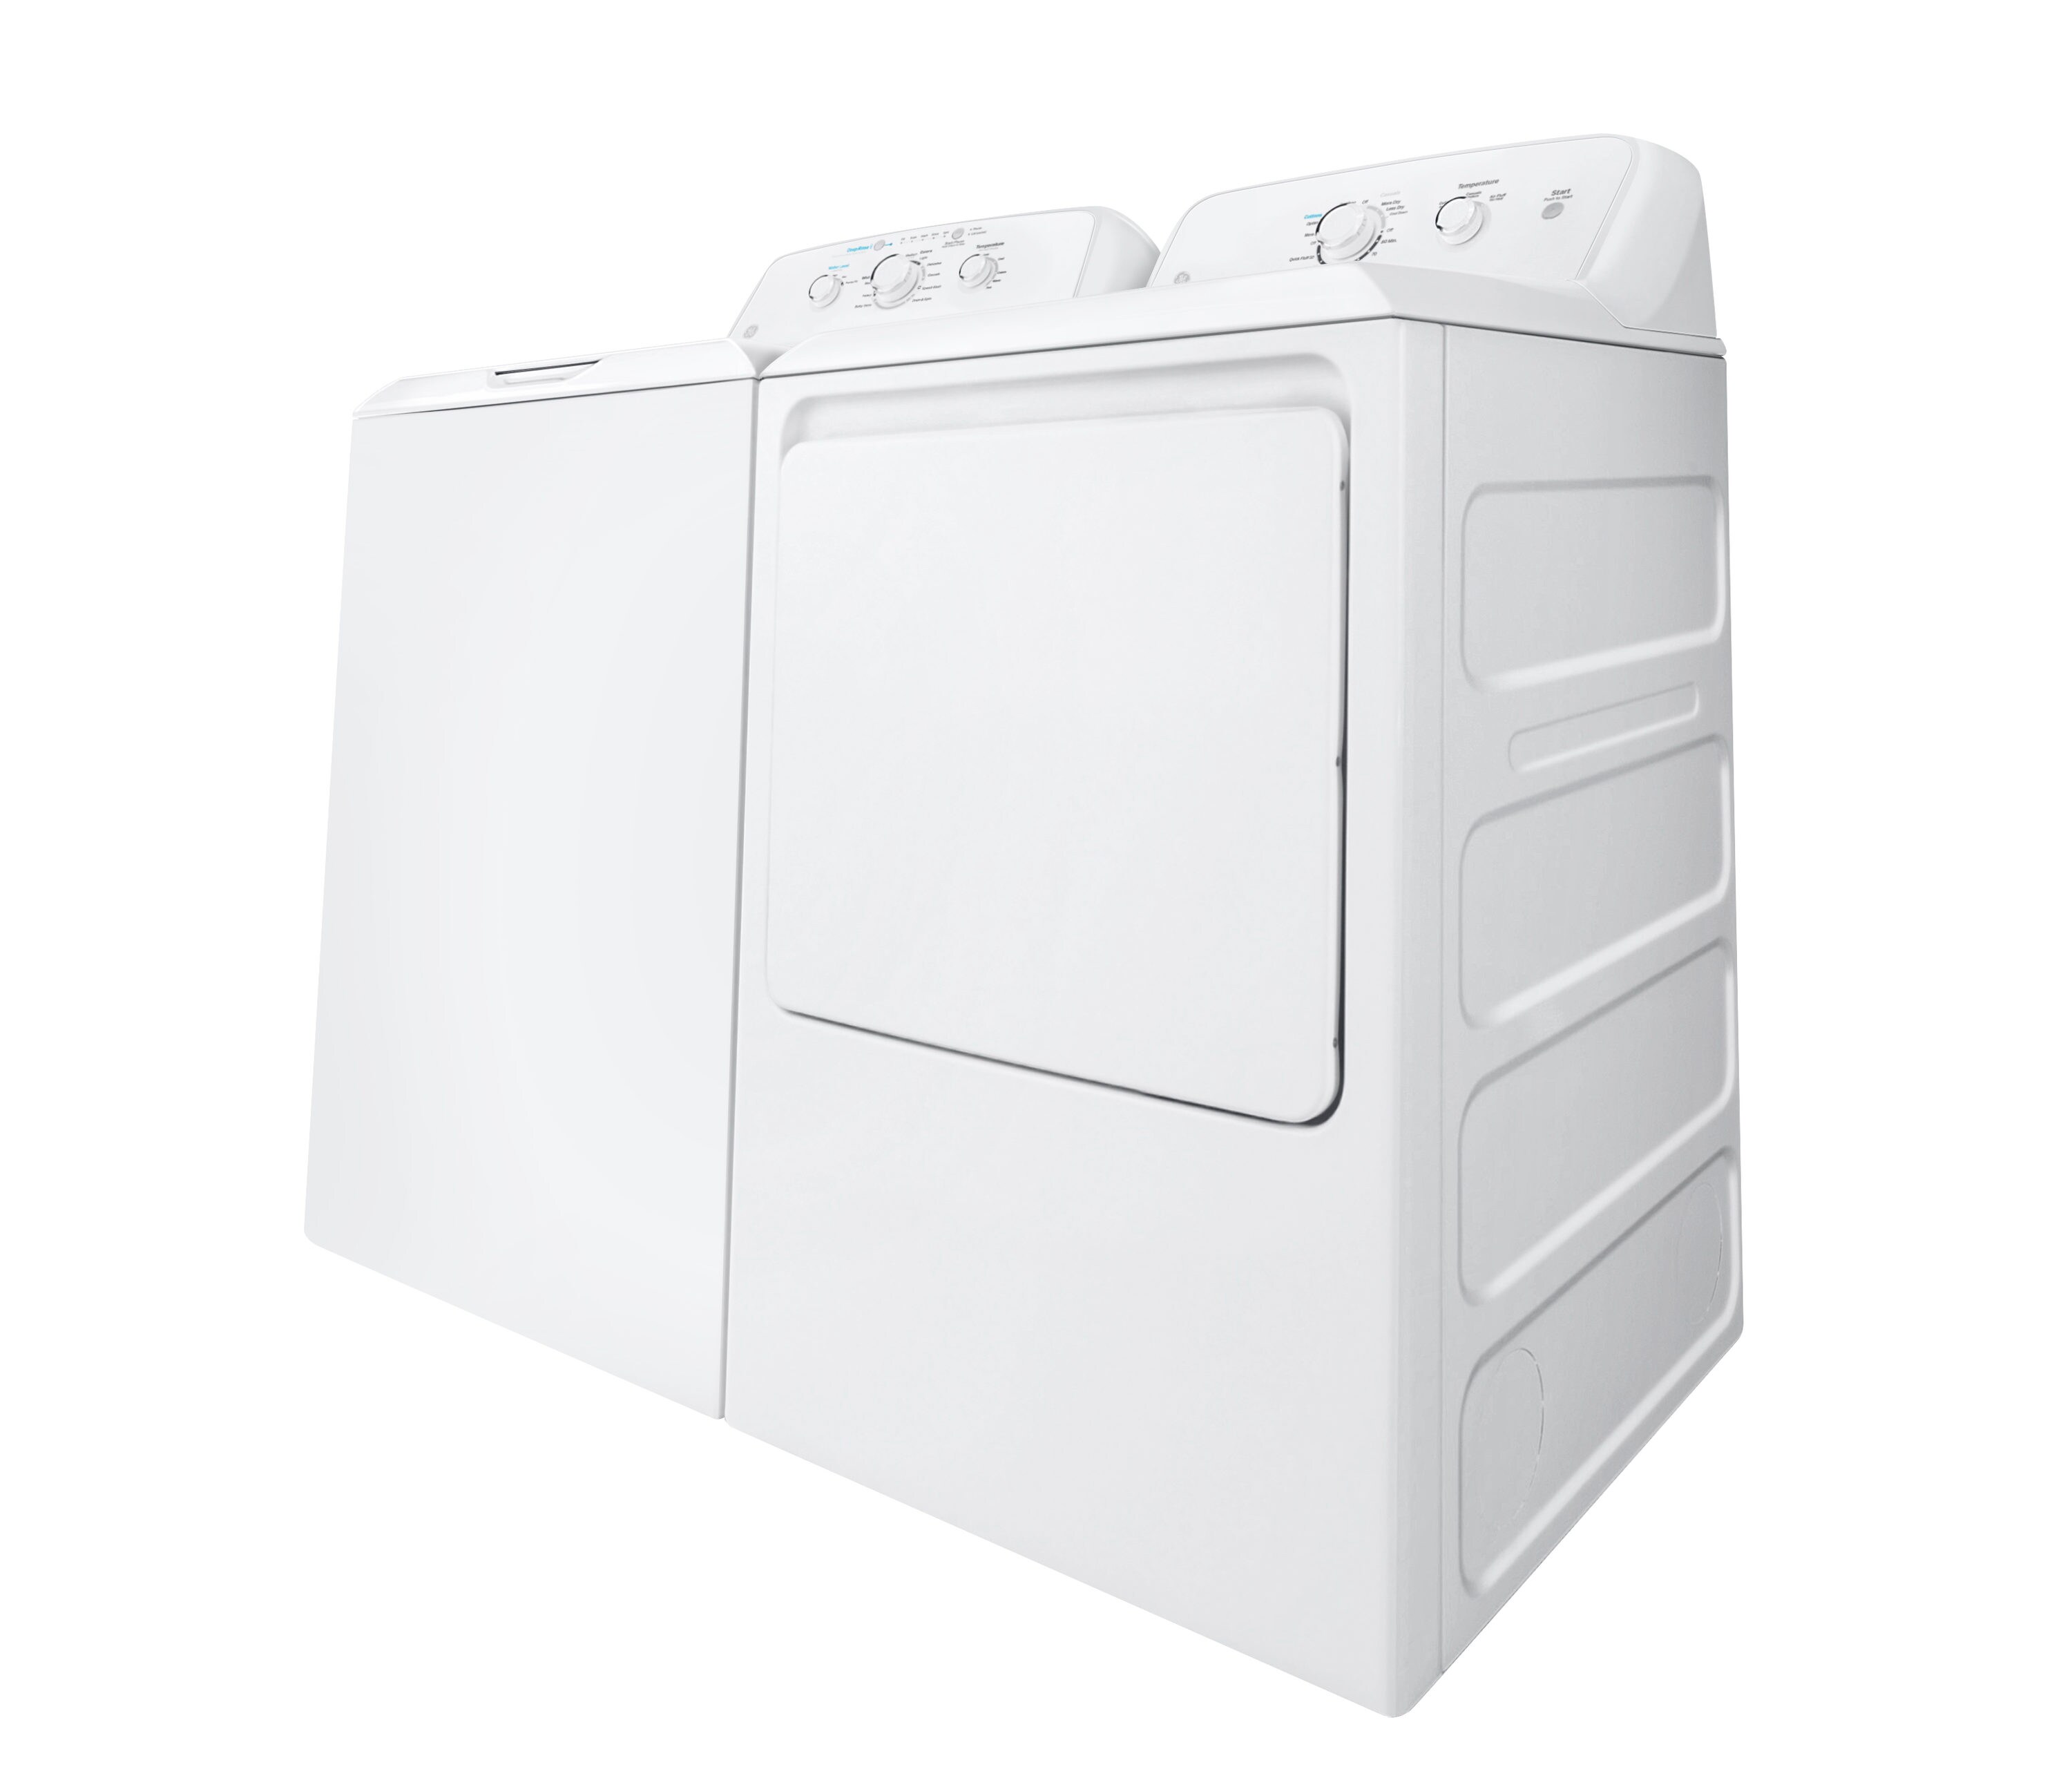 GE GTD33EASKWW 27 Inch Electric Dryer with 7.2 cu. ft. Capacity, 3 Dry –  Appliance Store Discount